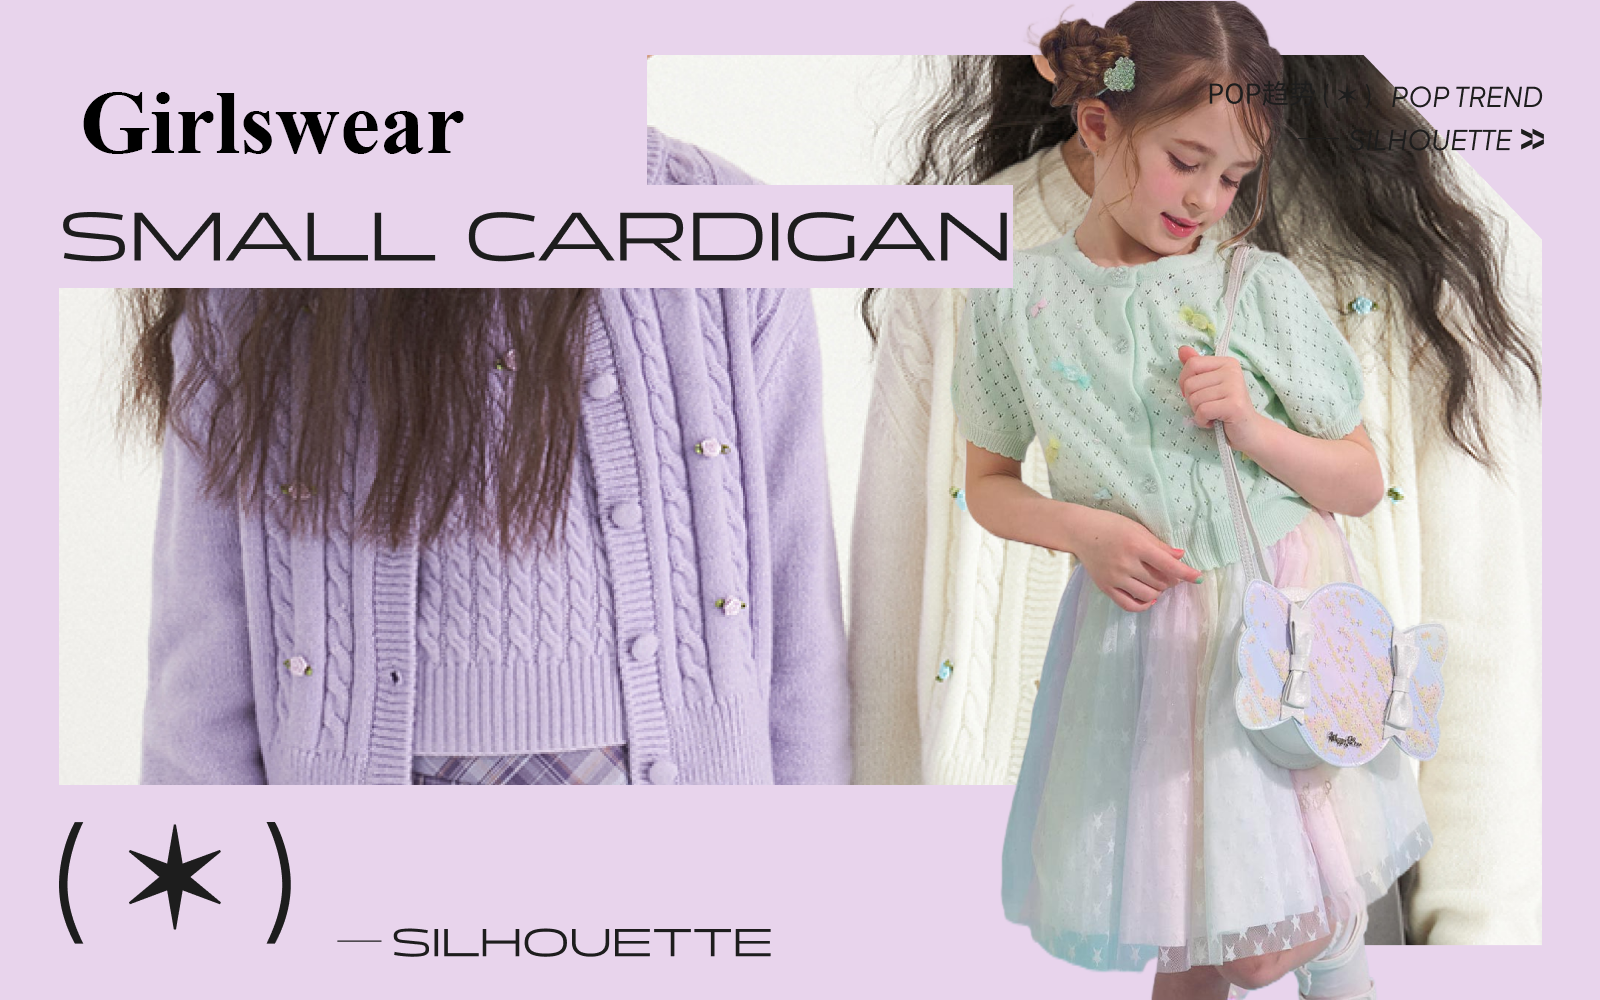 Versatile Cardigan -- The Silhouette Trend for Girlswear